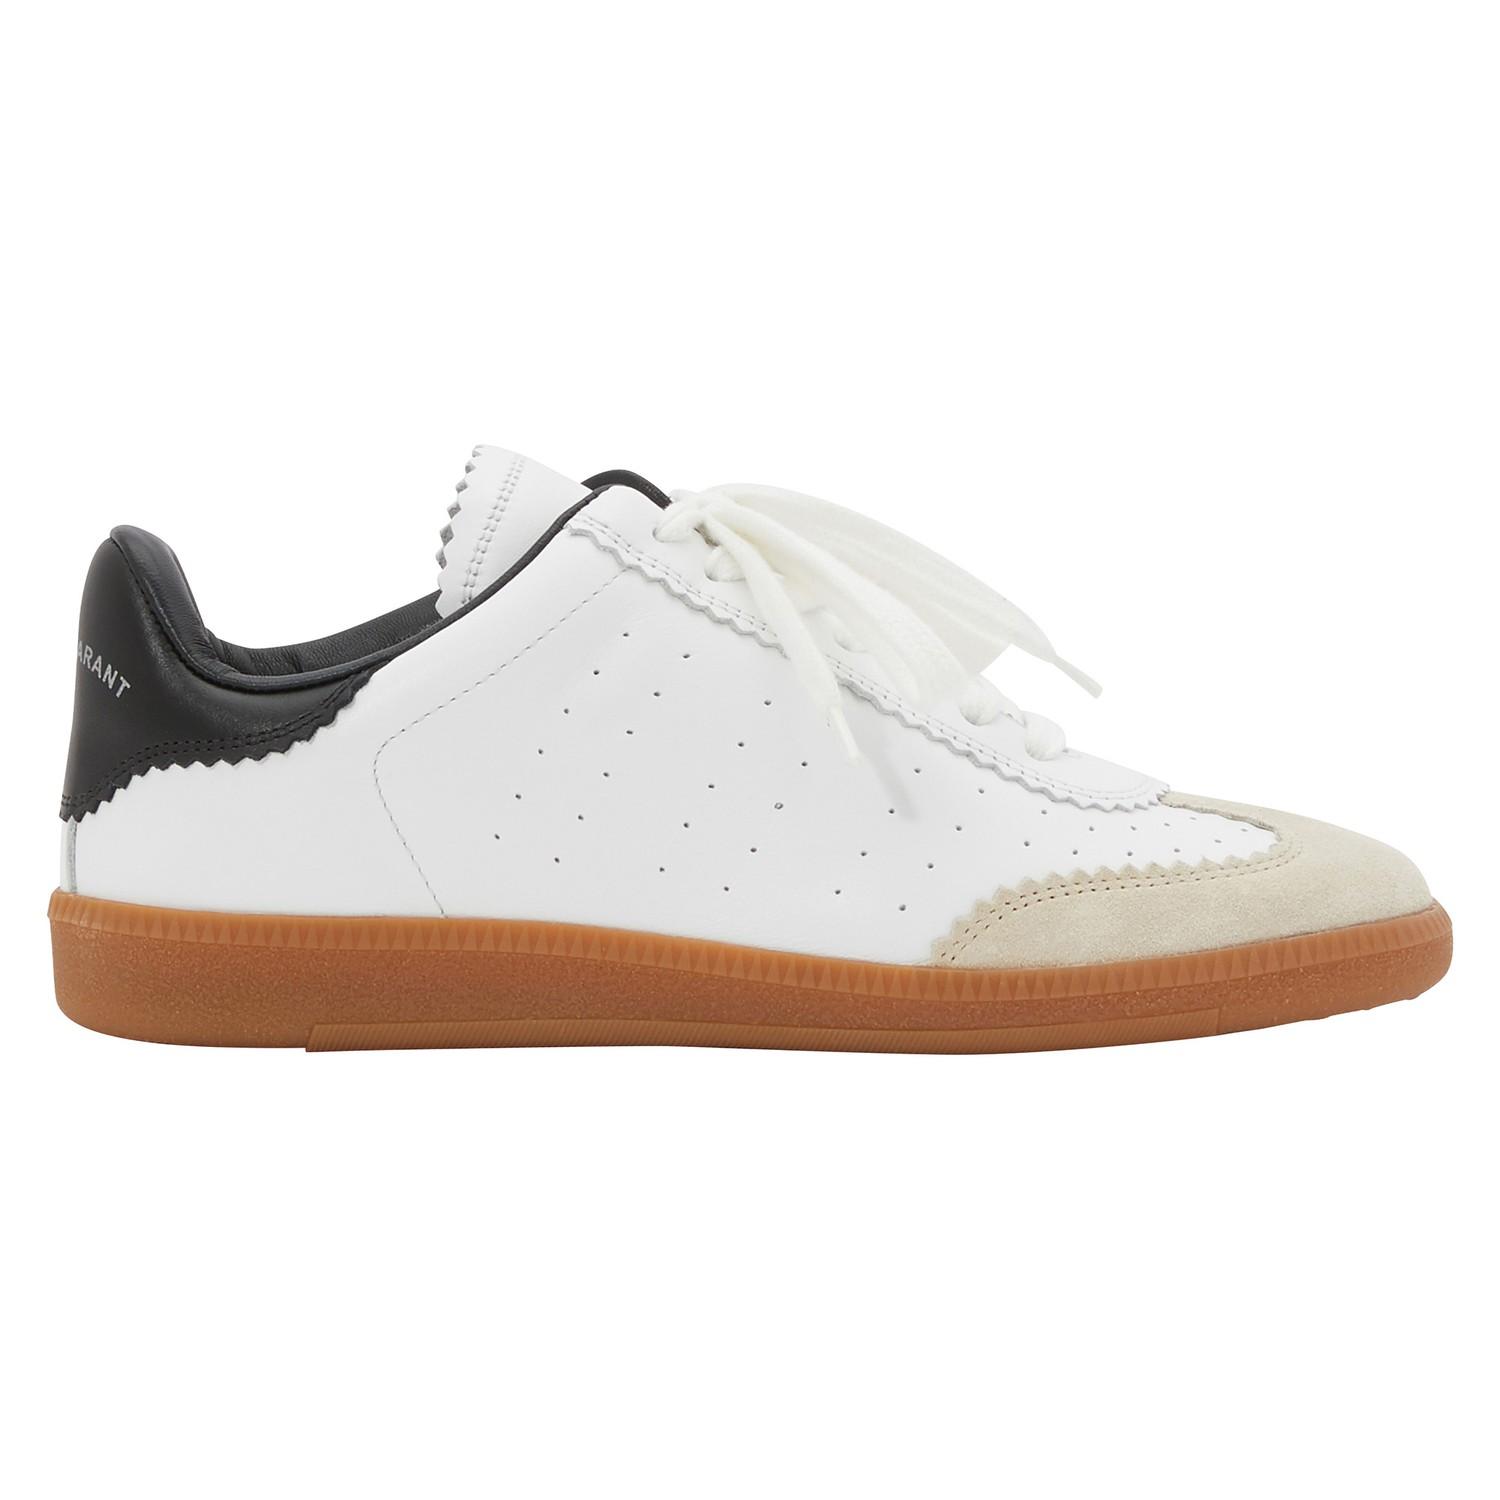 Isabel Marant Suede Bryce Sneackers in White - Lyst